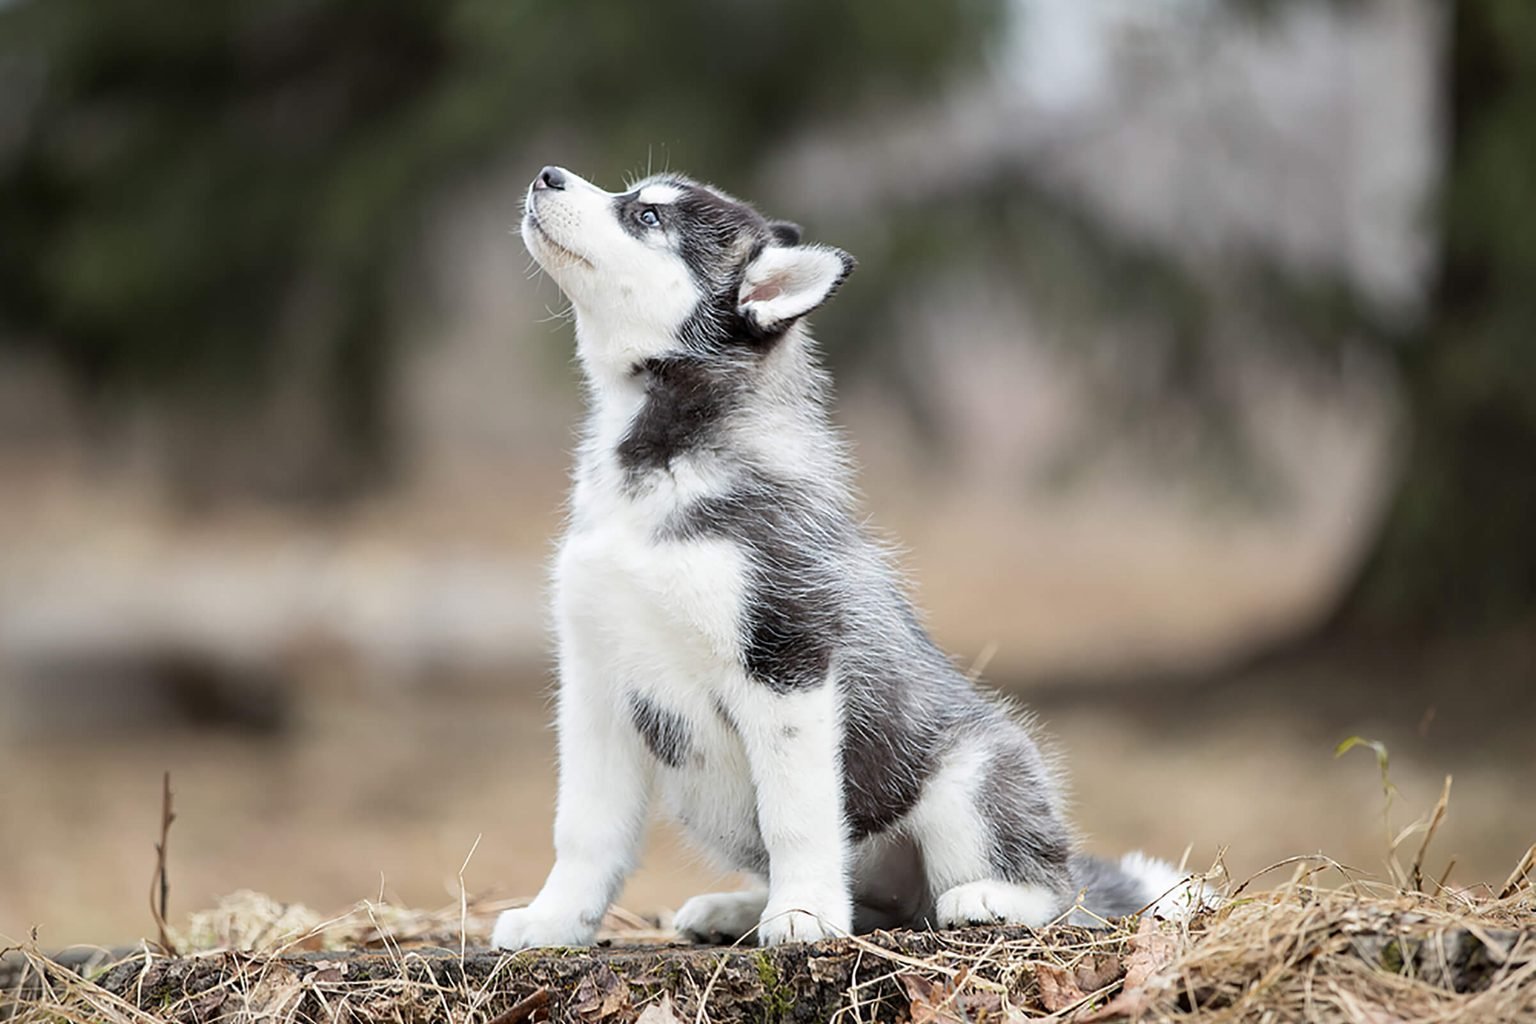 Can You Pass This General Knowledge Quiz While Being Distracted by Cute Puppies? Cute Dog Siberian Husky Puppy